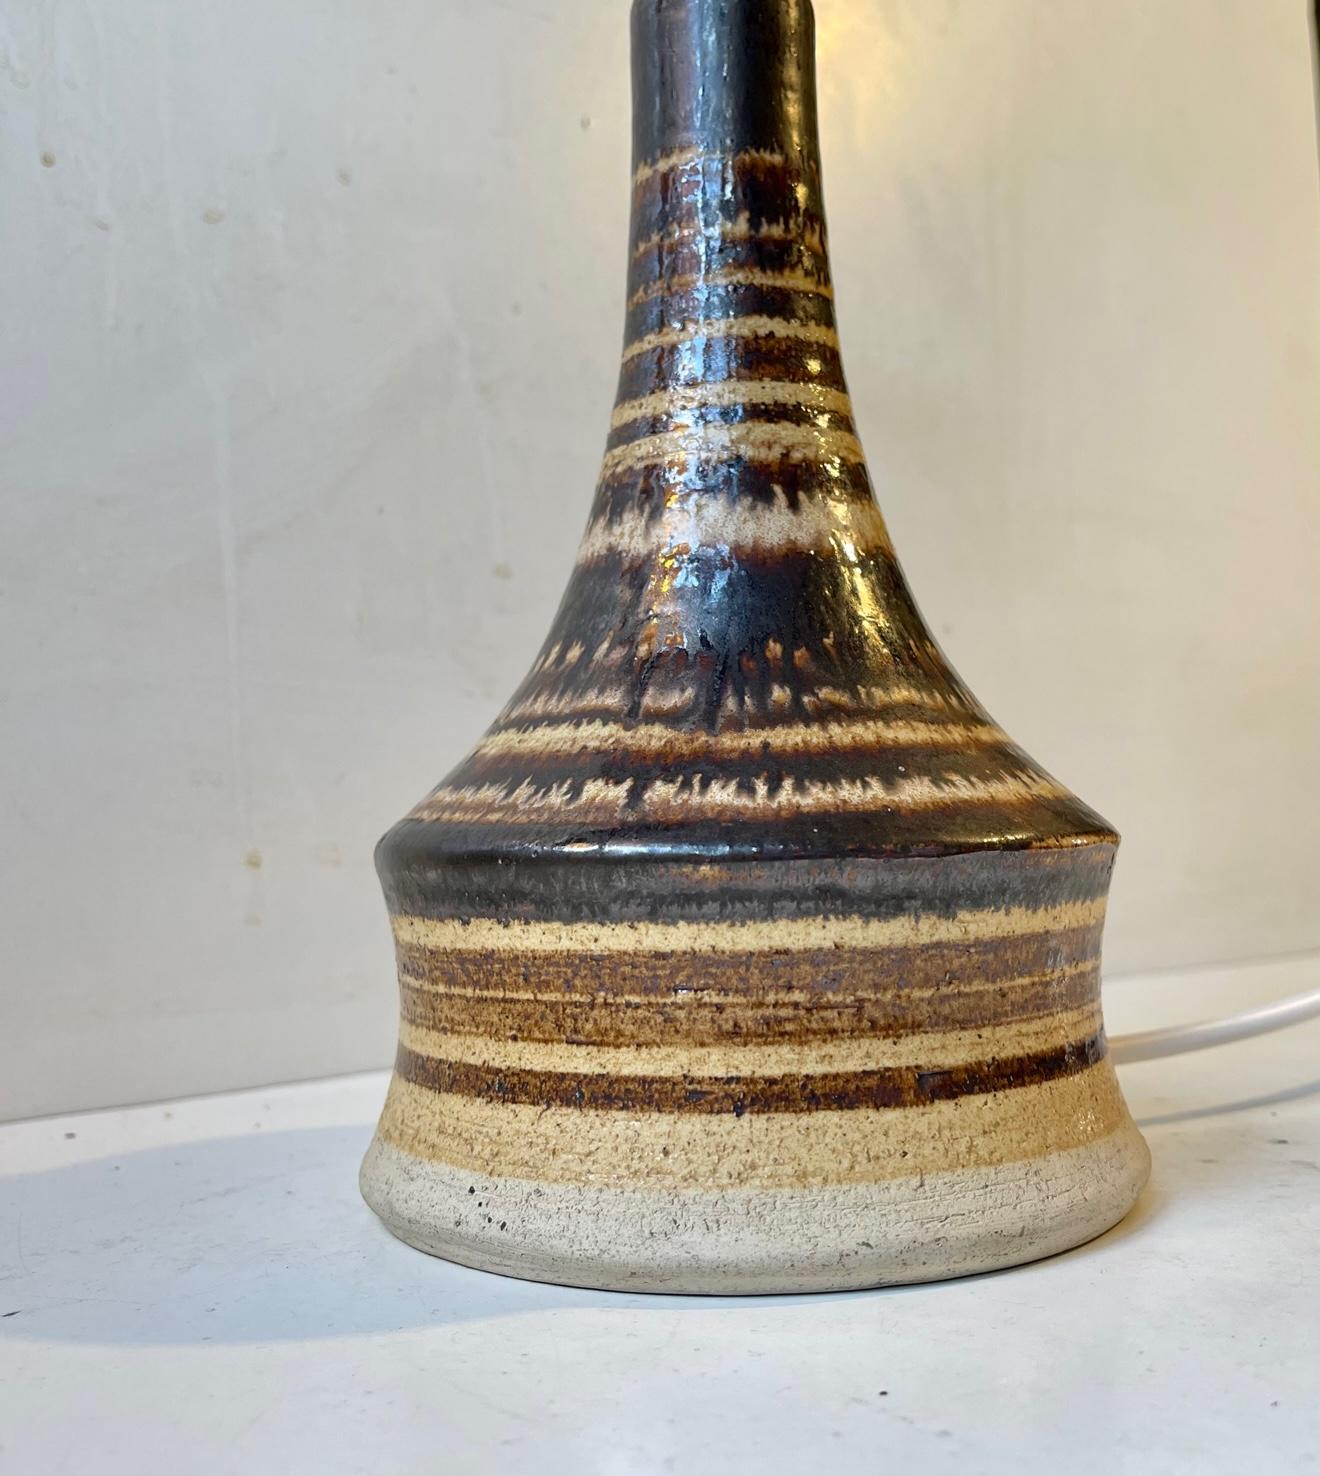 Italian Modern Table Lamp in Ceramic with Earthy Glaze Stripes, 1970s In Good Condition For Sale In Esbjerg, DK